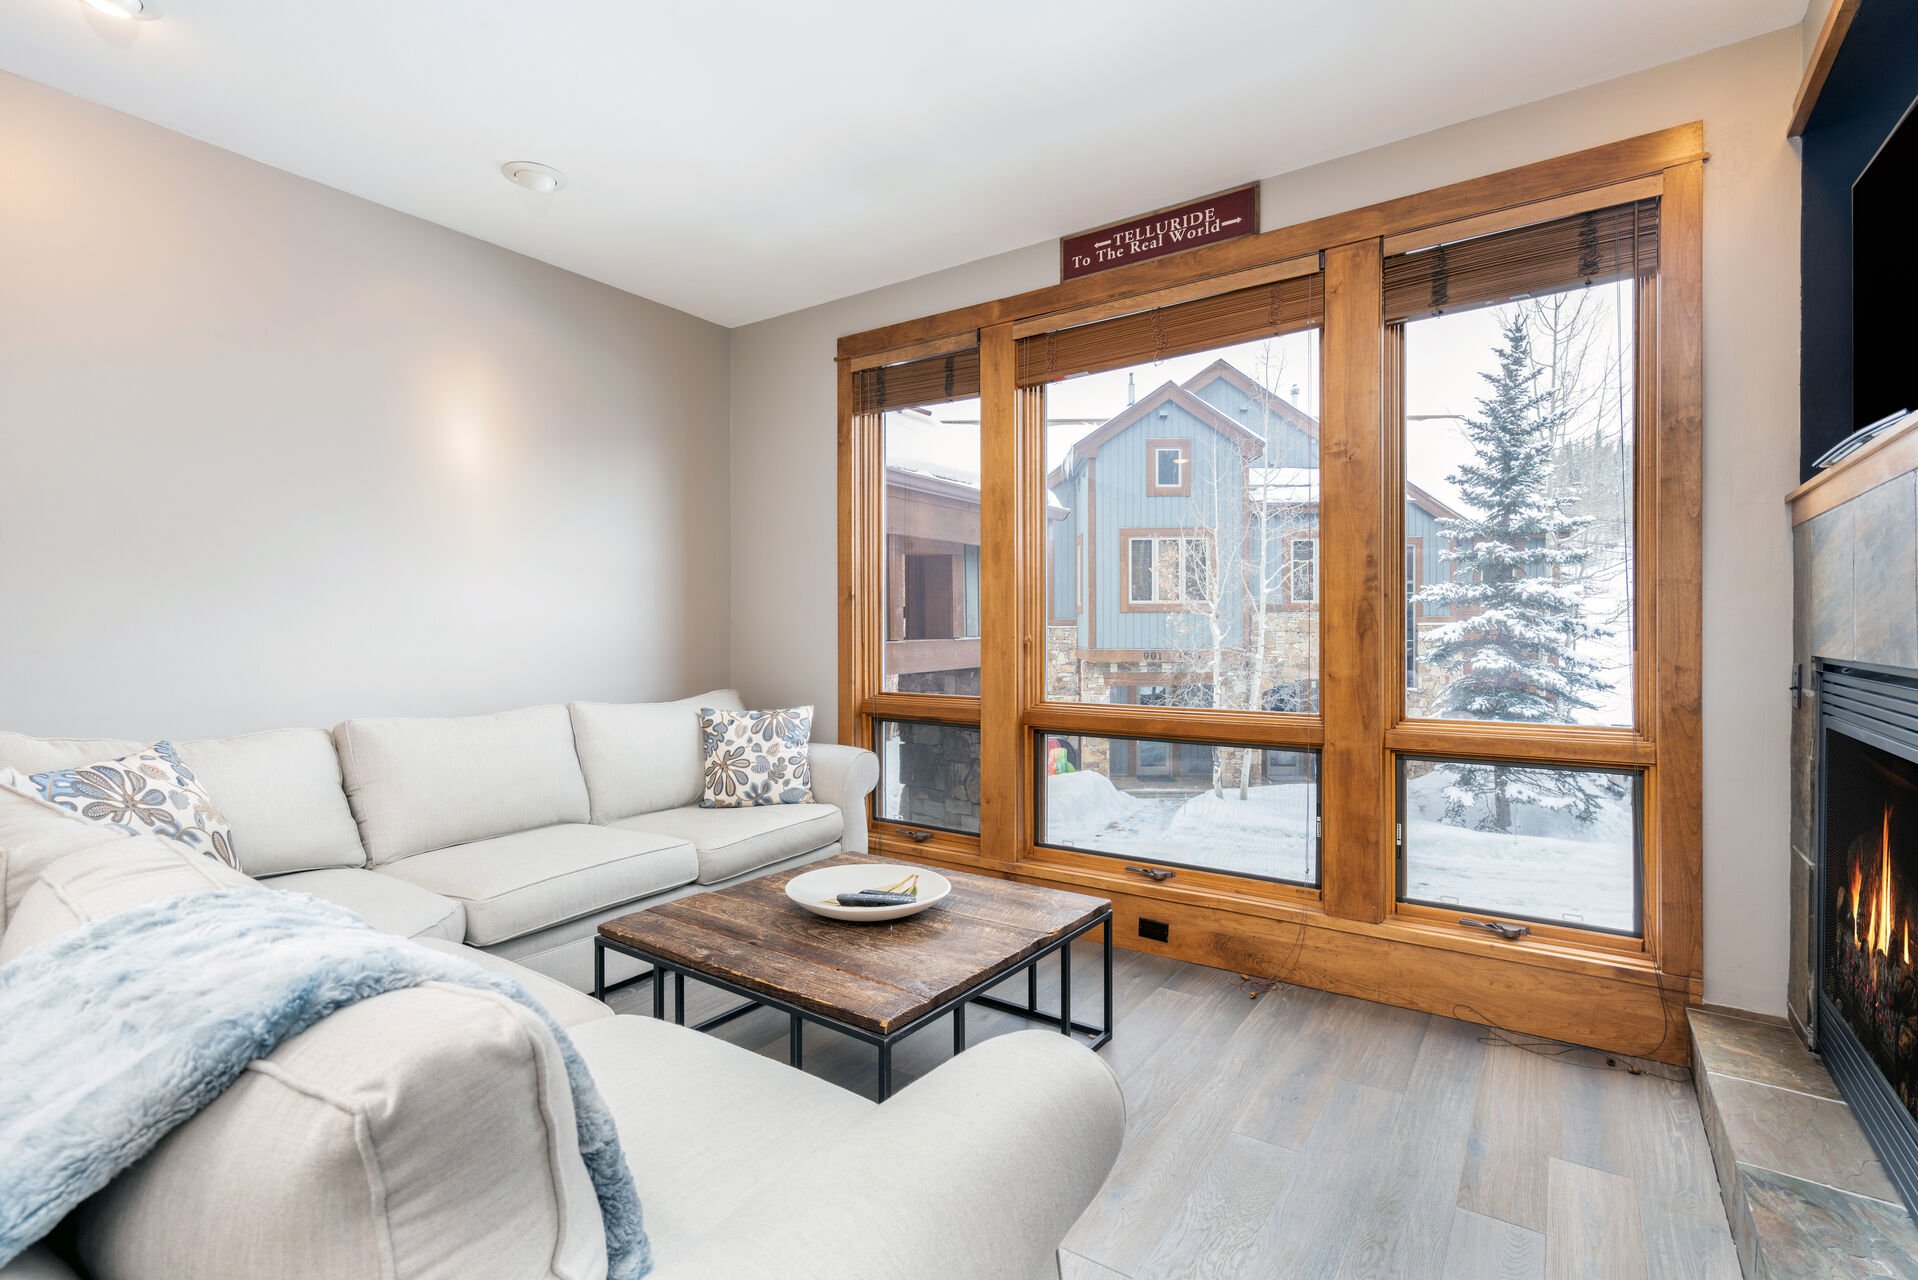 Living room with wood-framed window and snowy background